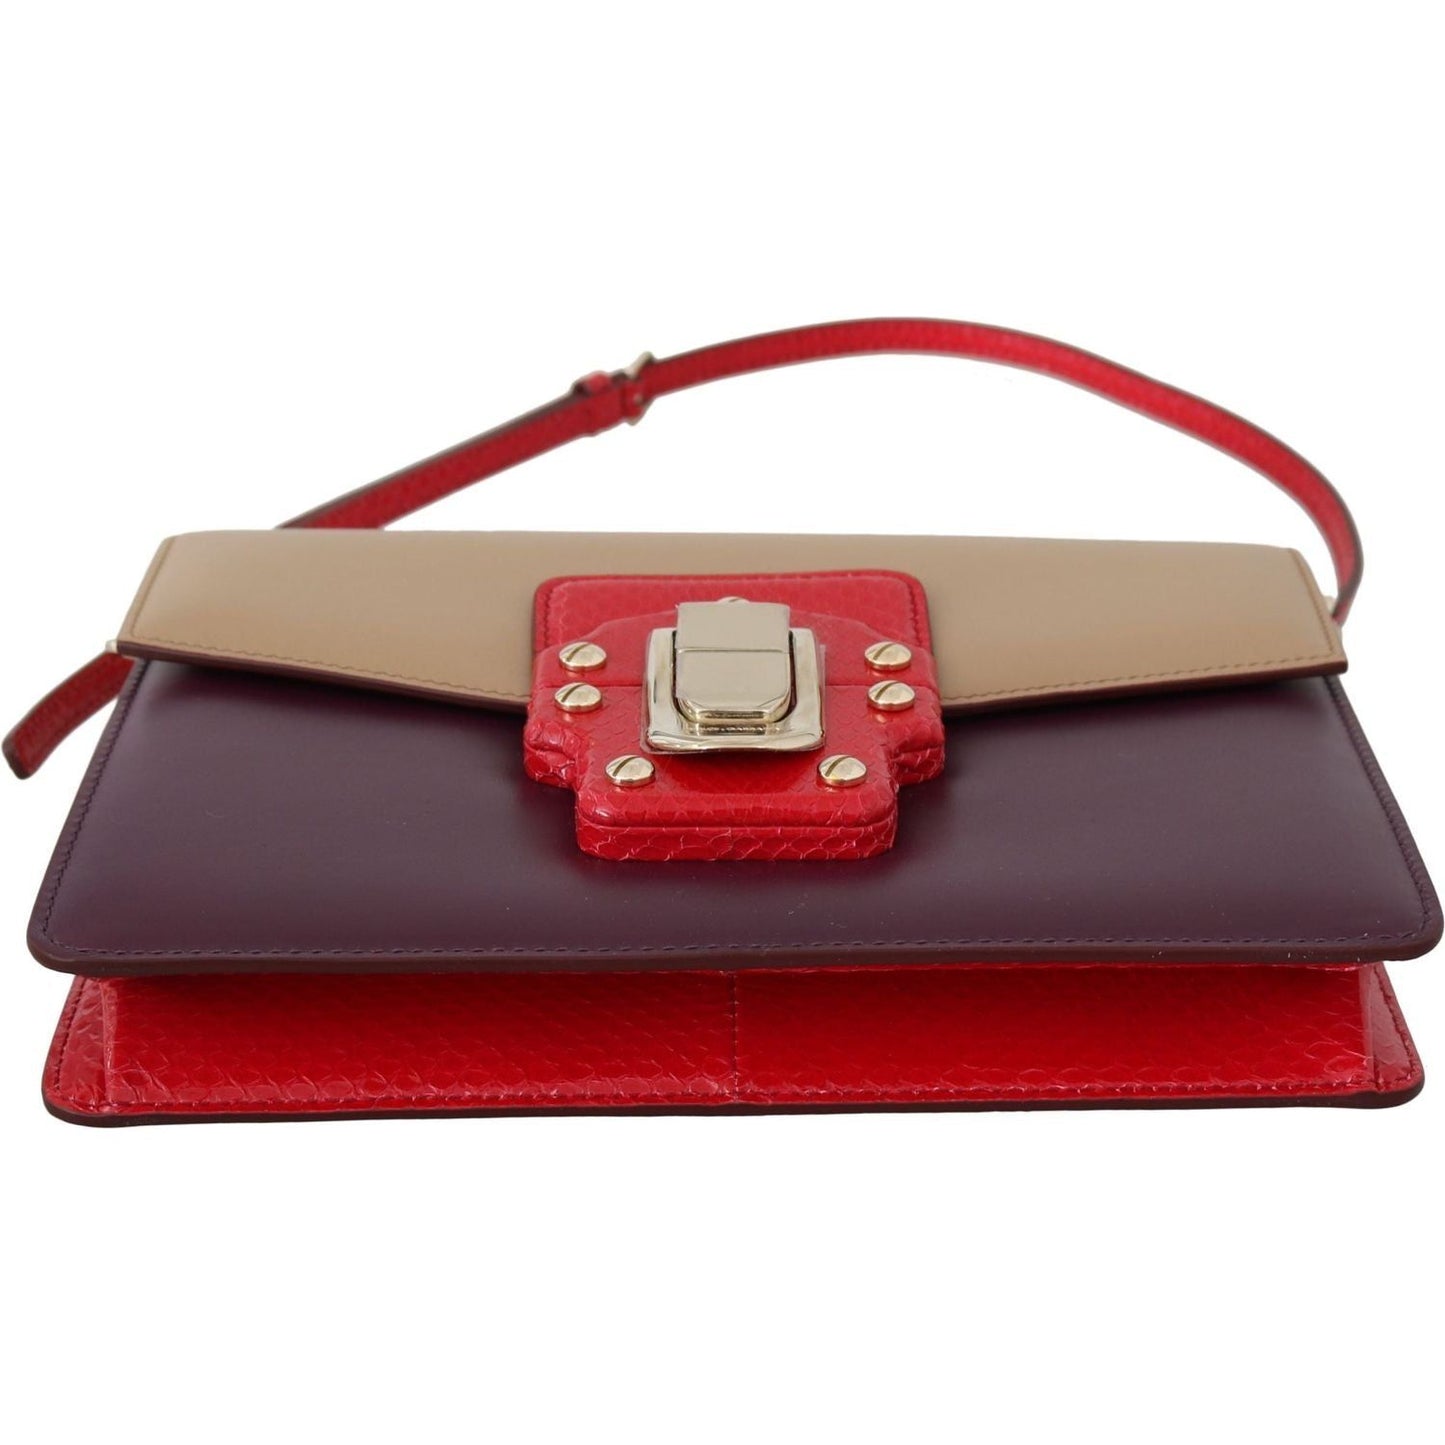 Dolce & Gabbana Exquisite LUCIA Leather Shoulder Bag purple-beige-red-leather-crossbody-purse-bag Purse IMG_0376-1-scaled-679ba6d3-f59.jpg